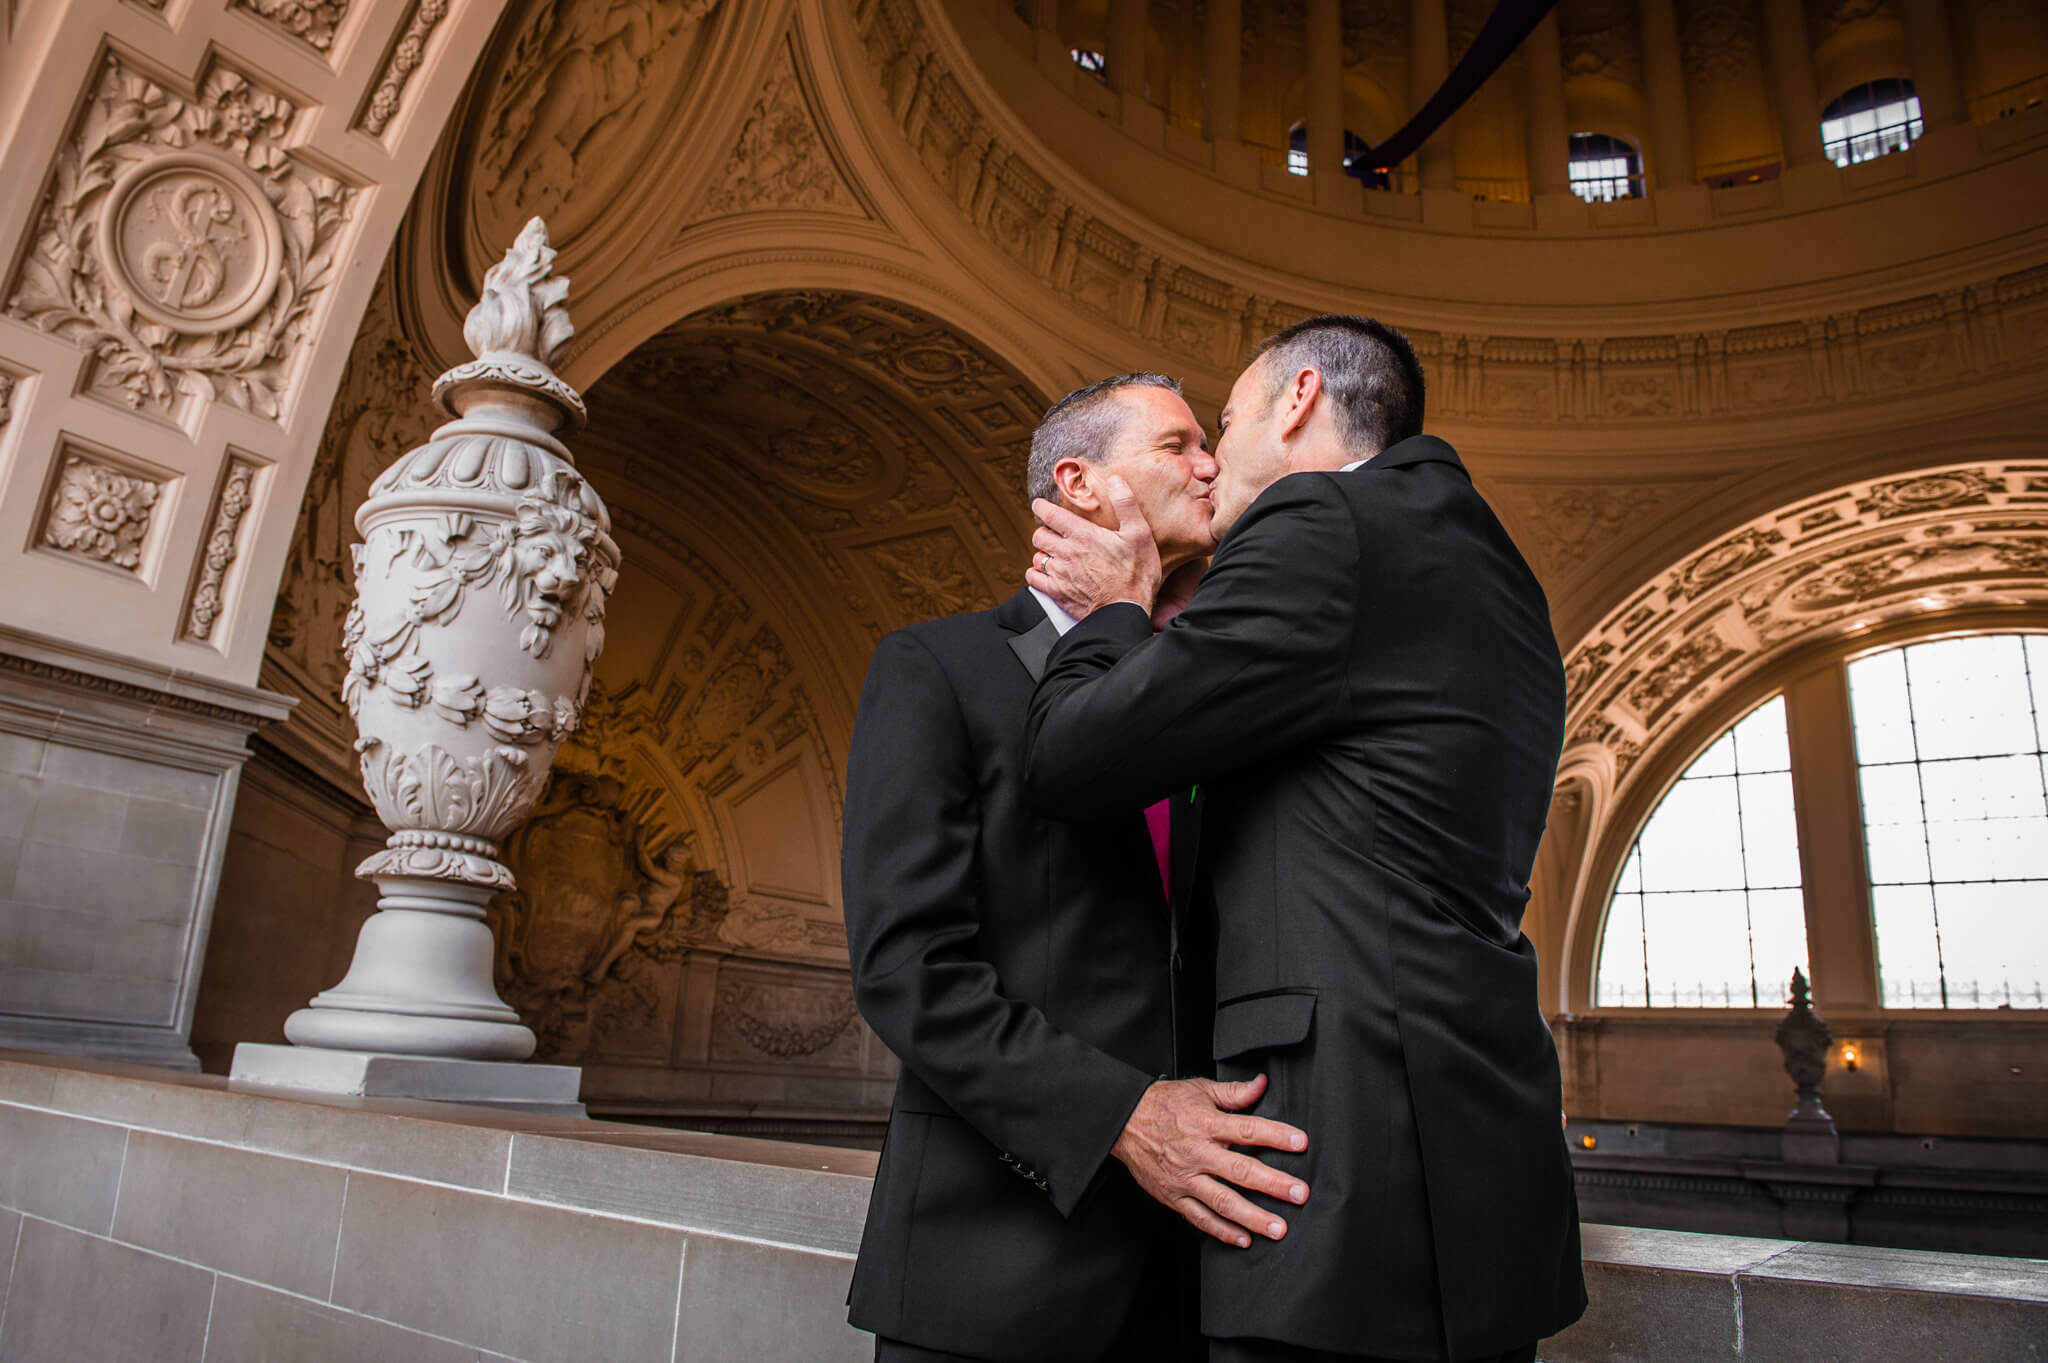 Grooms kiss at the altar at San Francisco City Hall after they become officially married